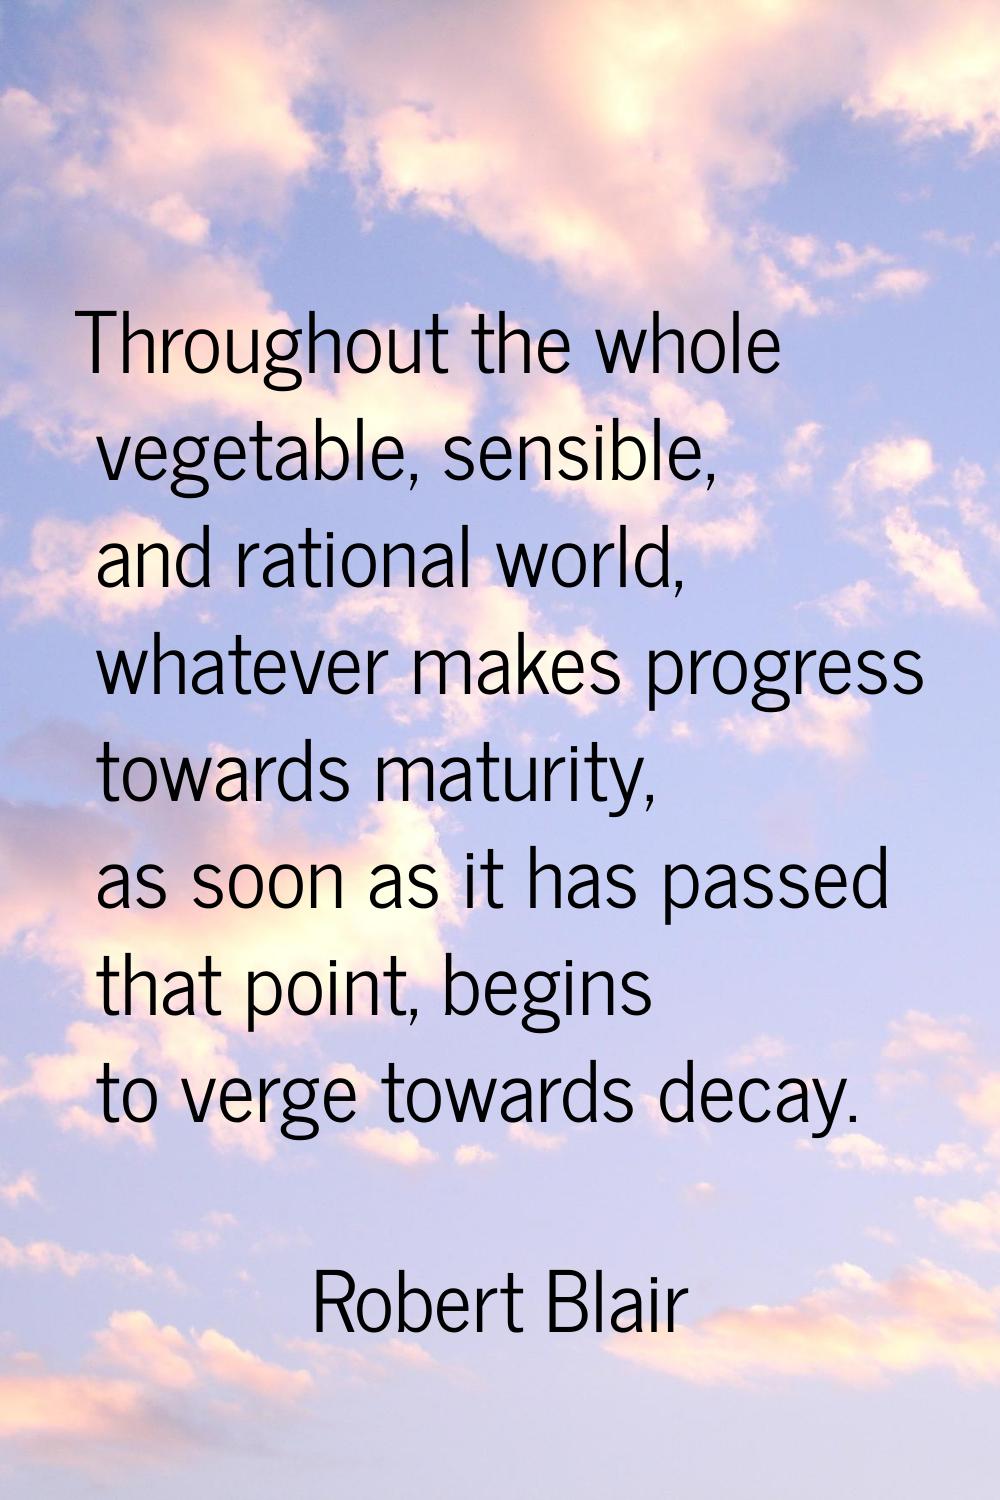 Throughout the whole vegetable, sensible, and rational world, whatever makes progress towards matur